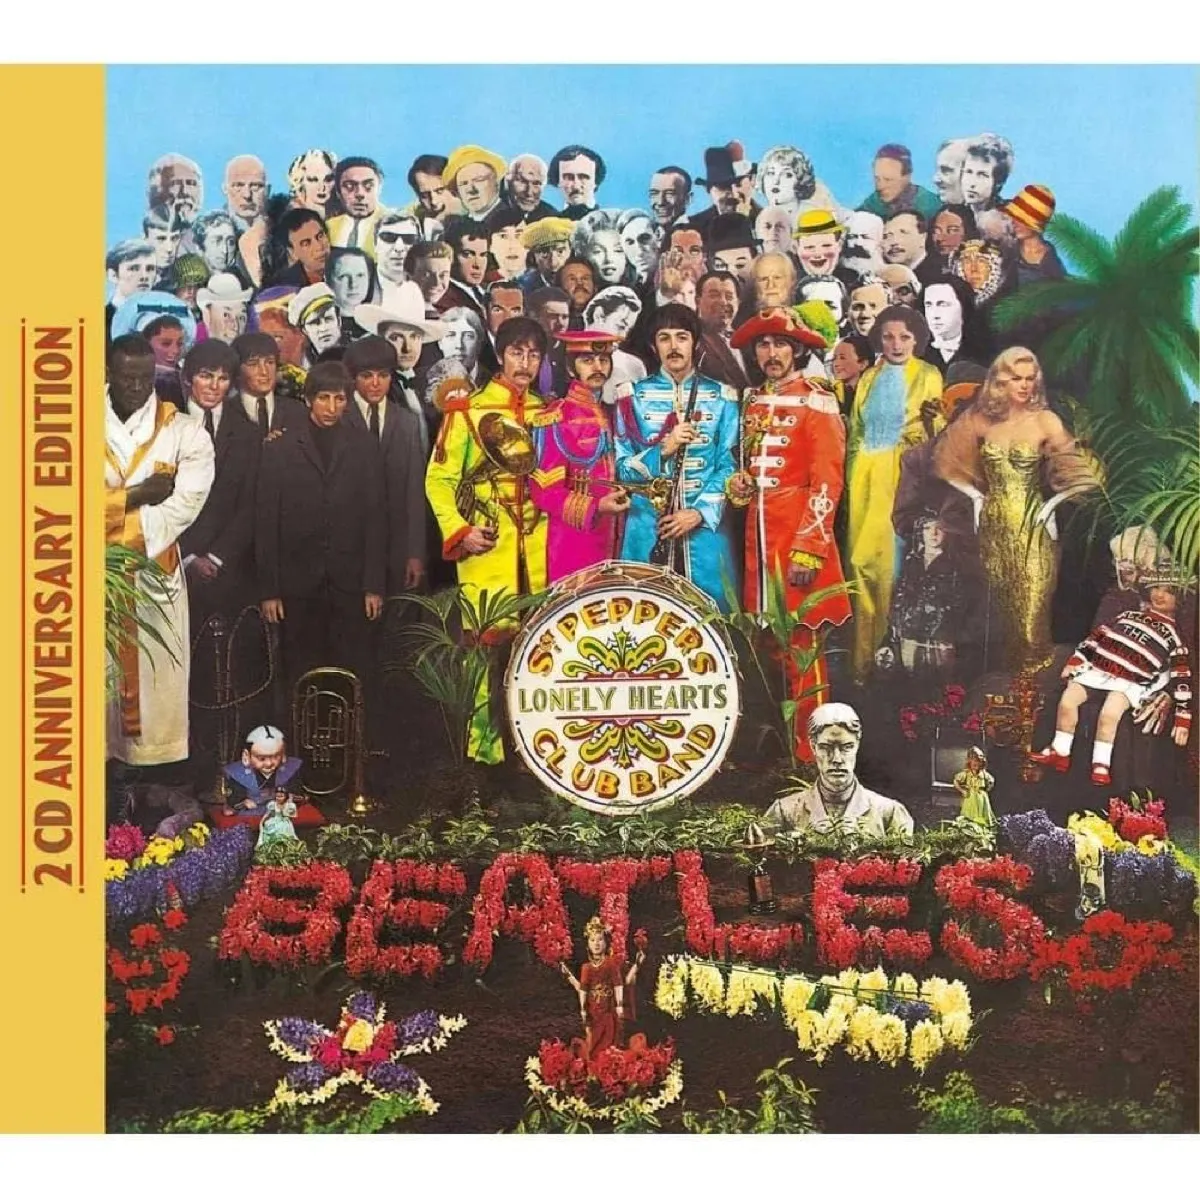 "Sgt. Pepper's Lonely Hearts Club Band: 50th Anniversary Edition" by The Beatles album cover